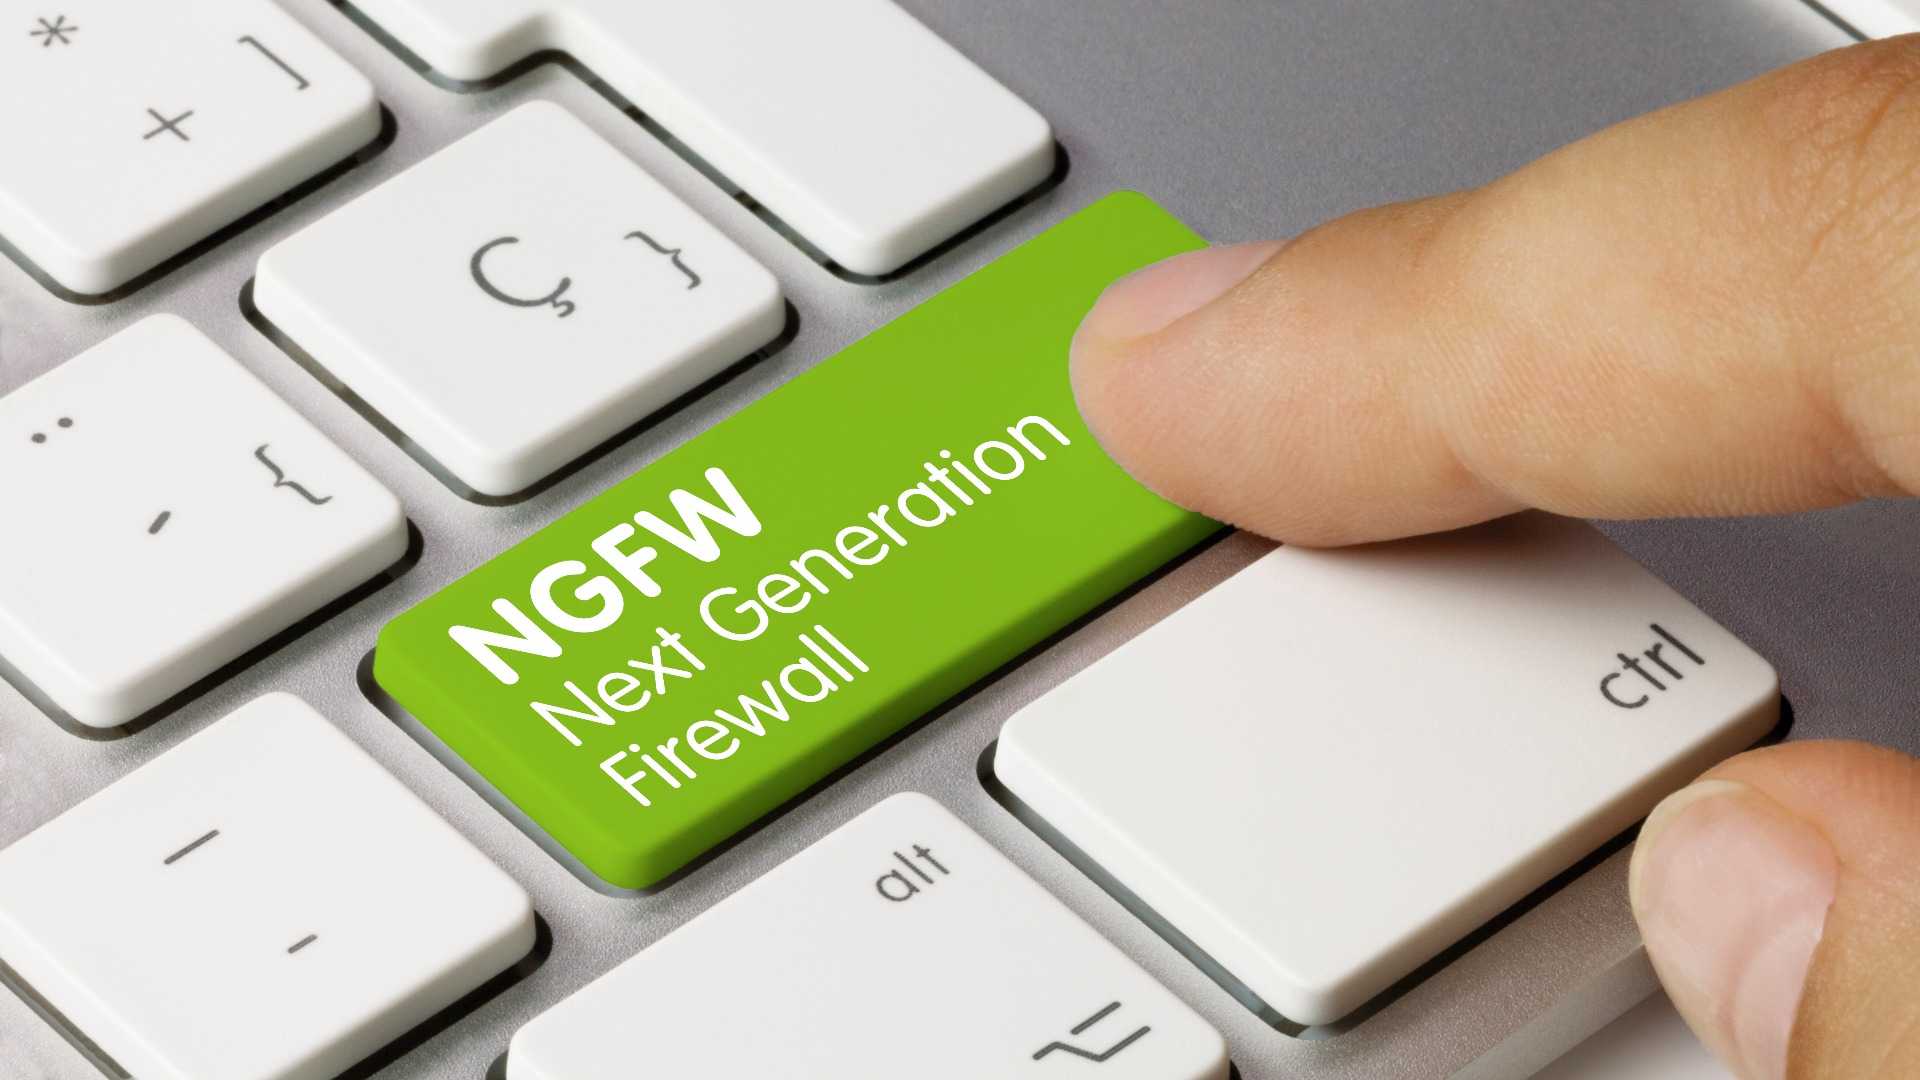 Next Generation Firewalls: Do I need one? Are they worth it?